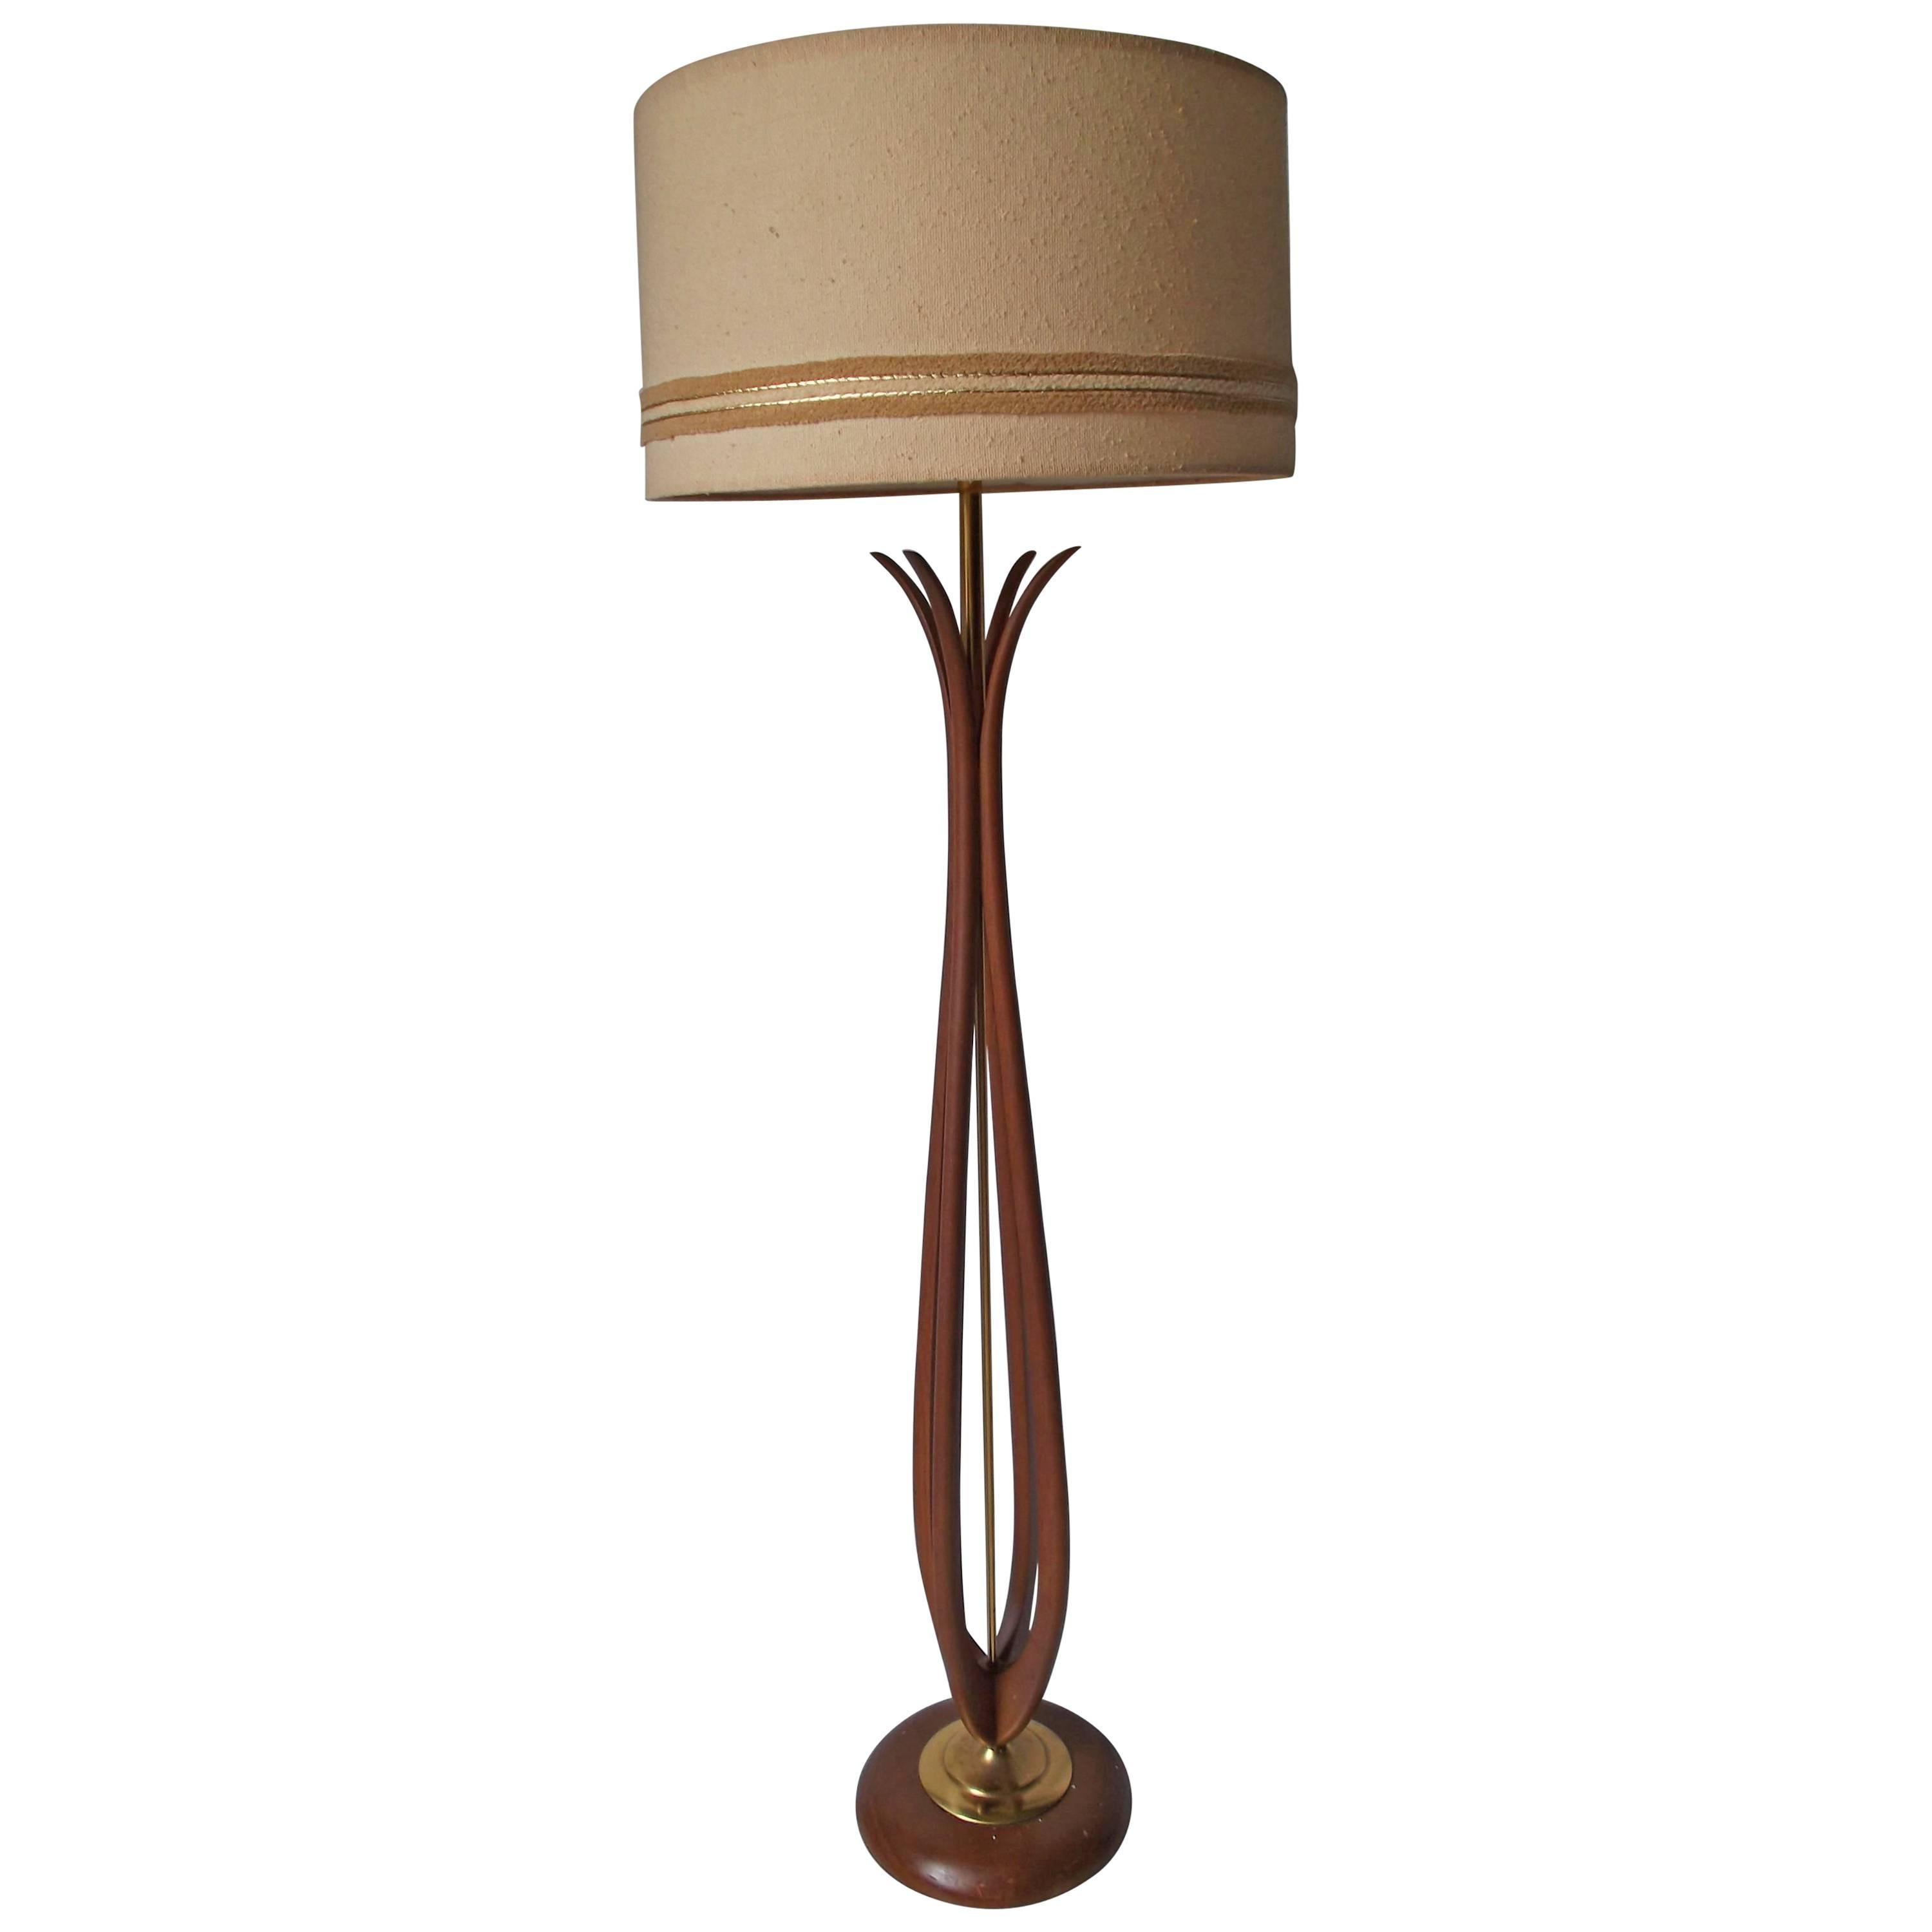 Rembrandt Danish Modern Style Floor lamp with Wood Spines